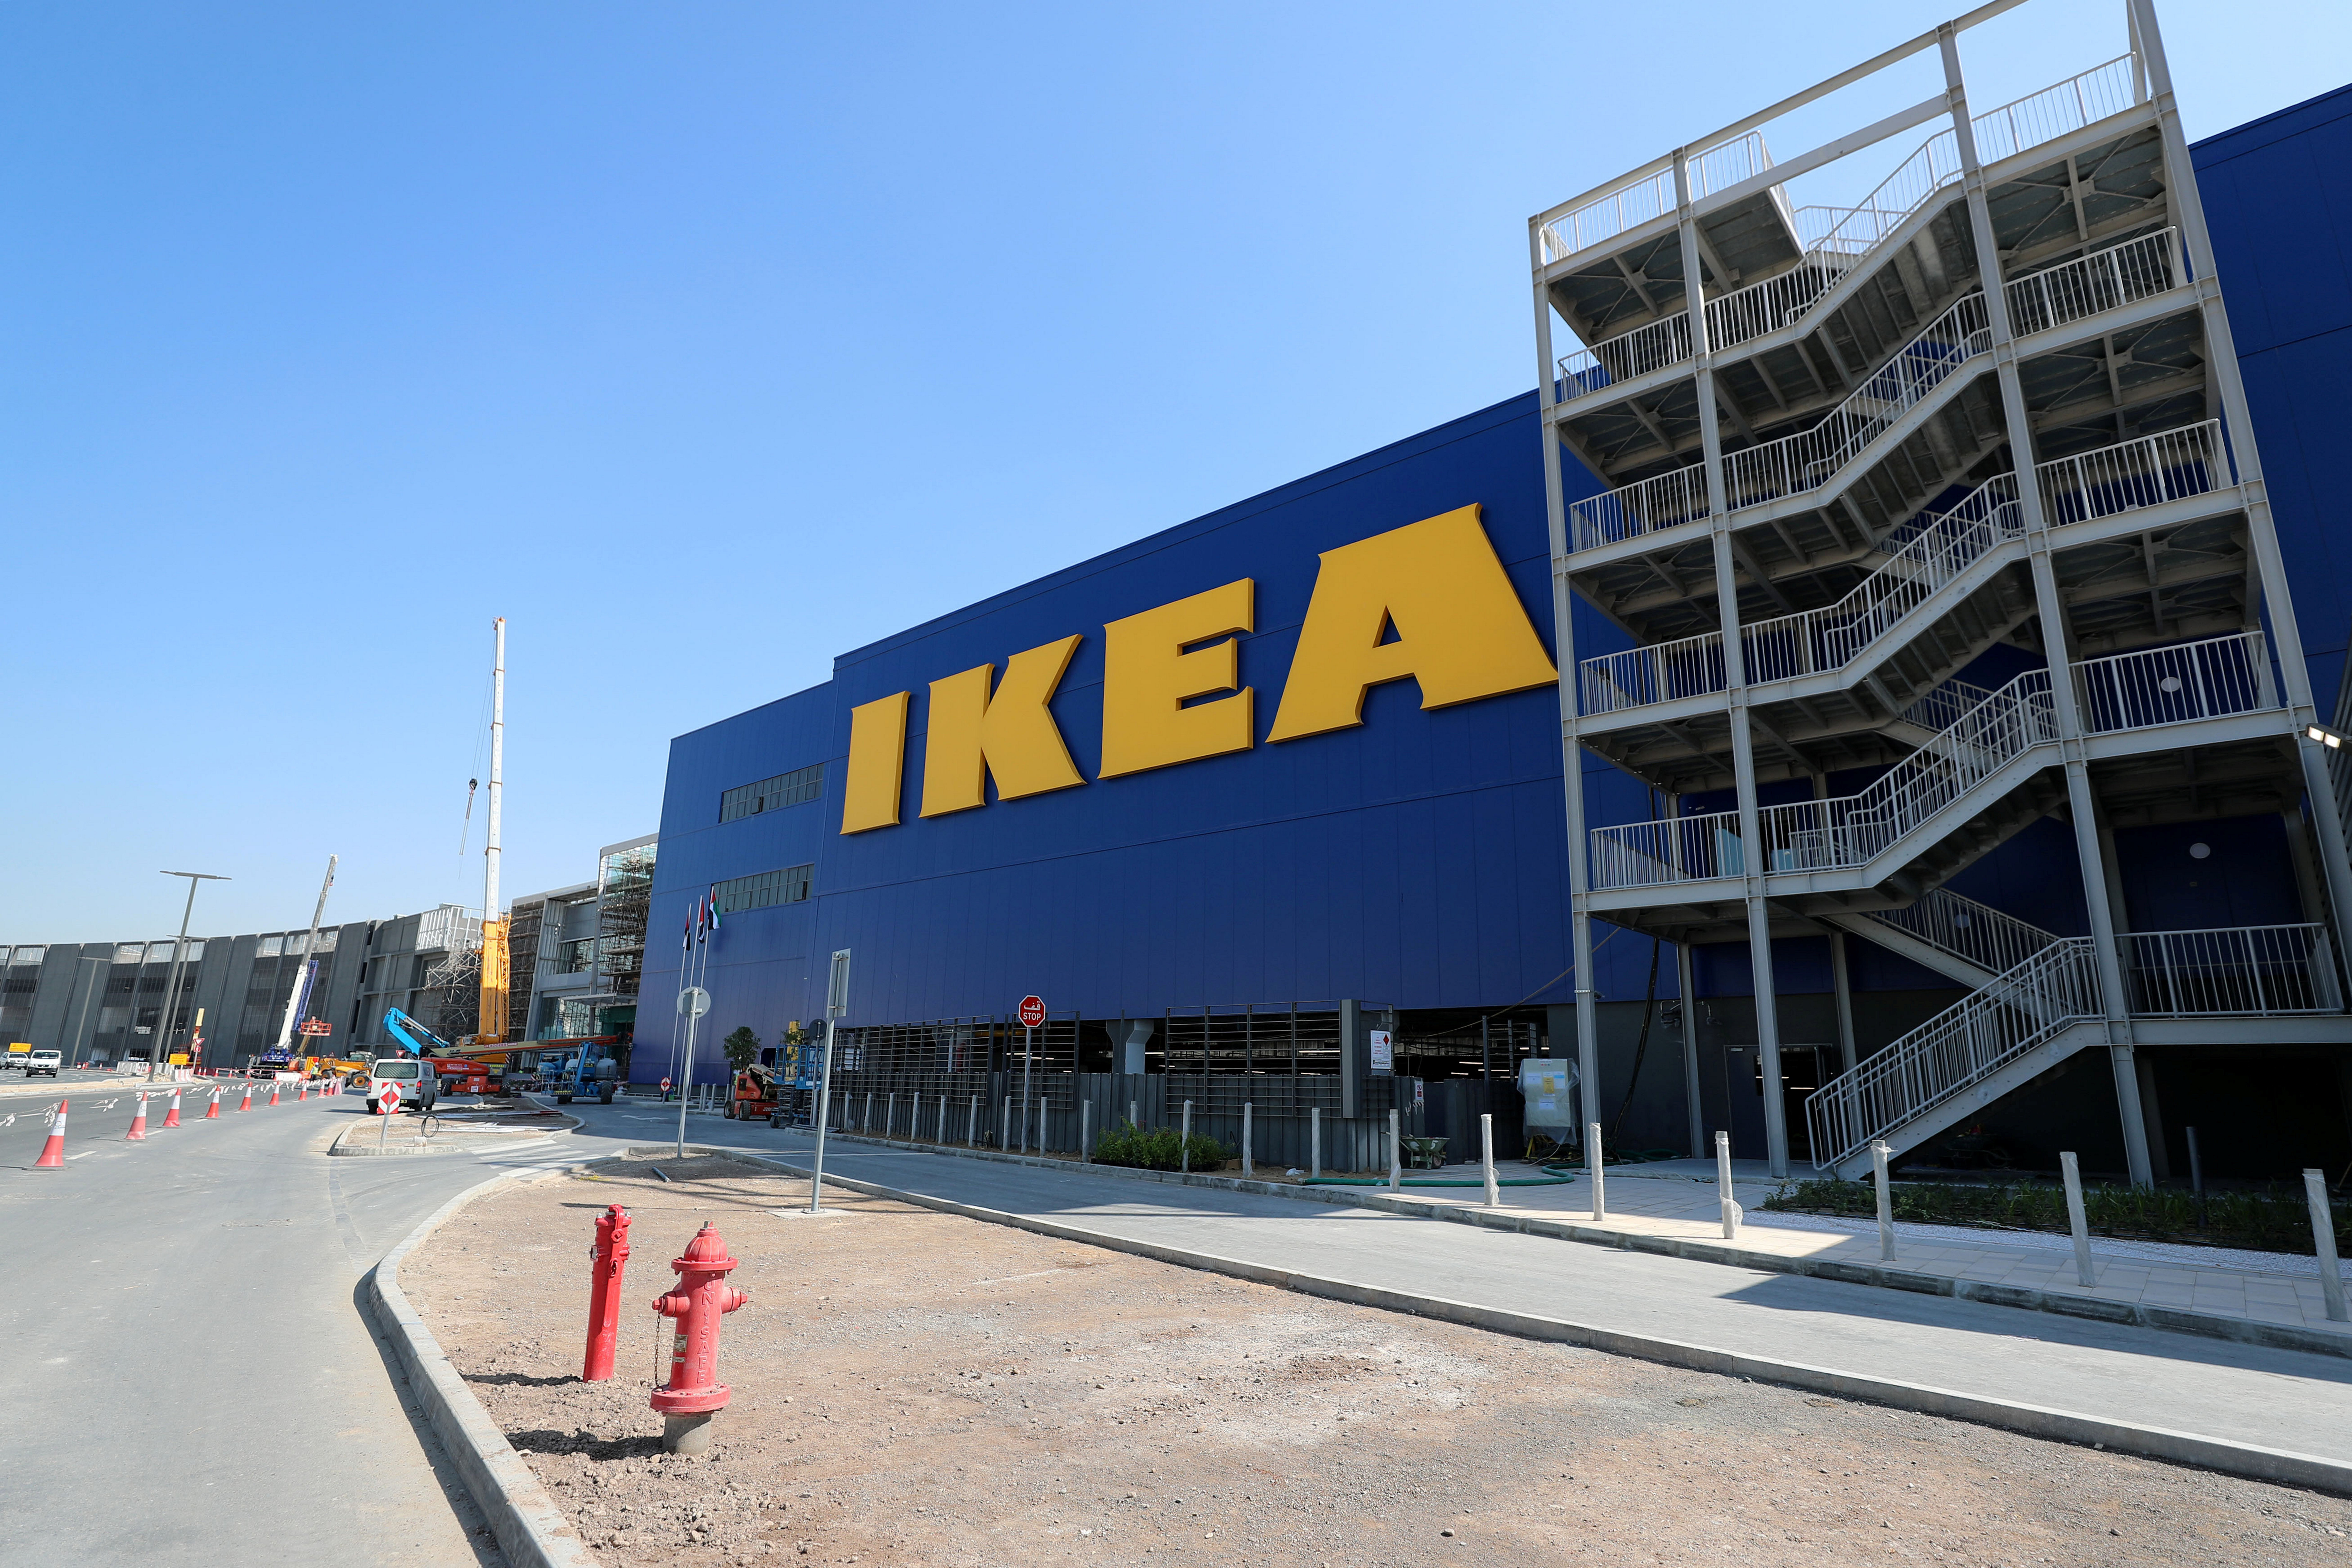 Ikea to invest $2.2 billion in new U.S. store models, pickup locations